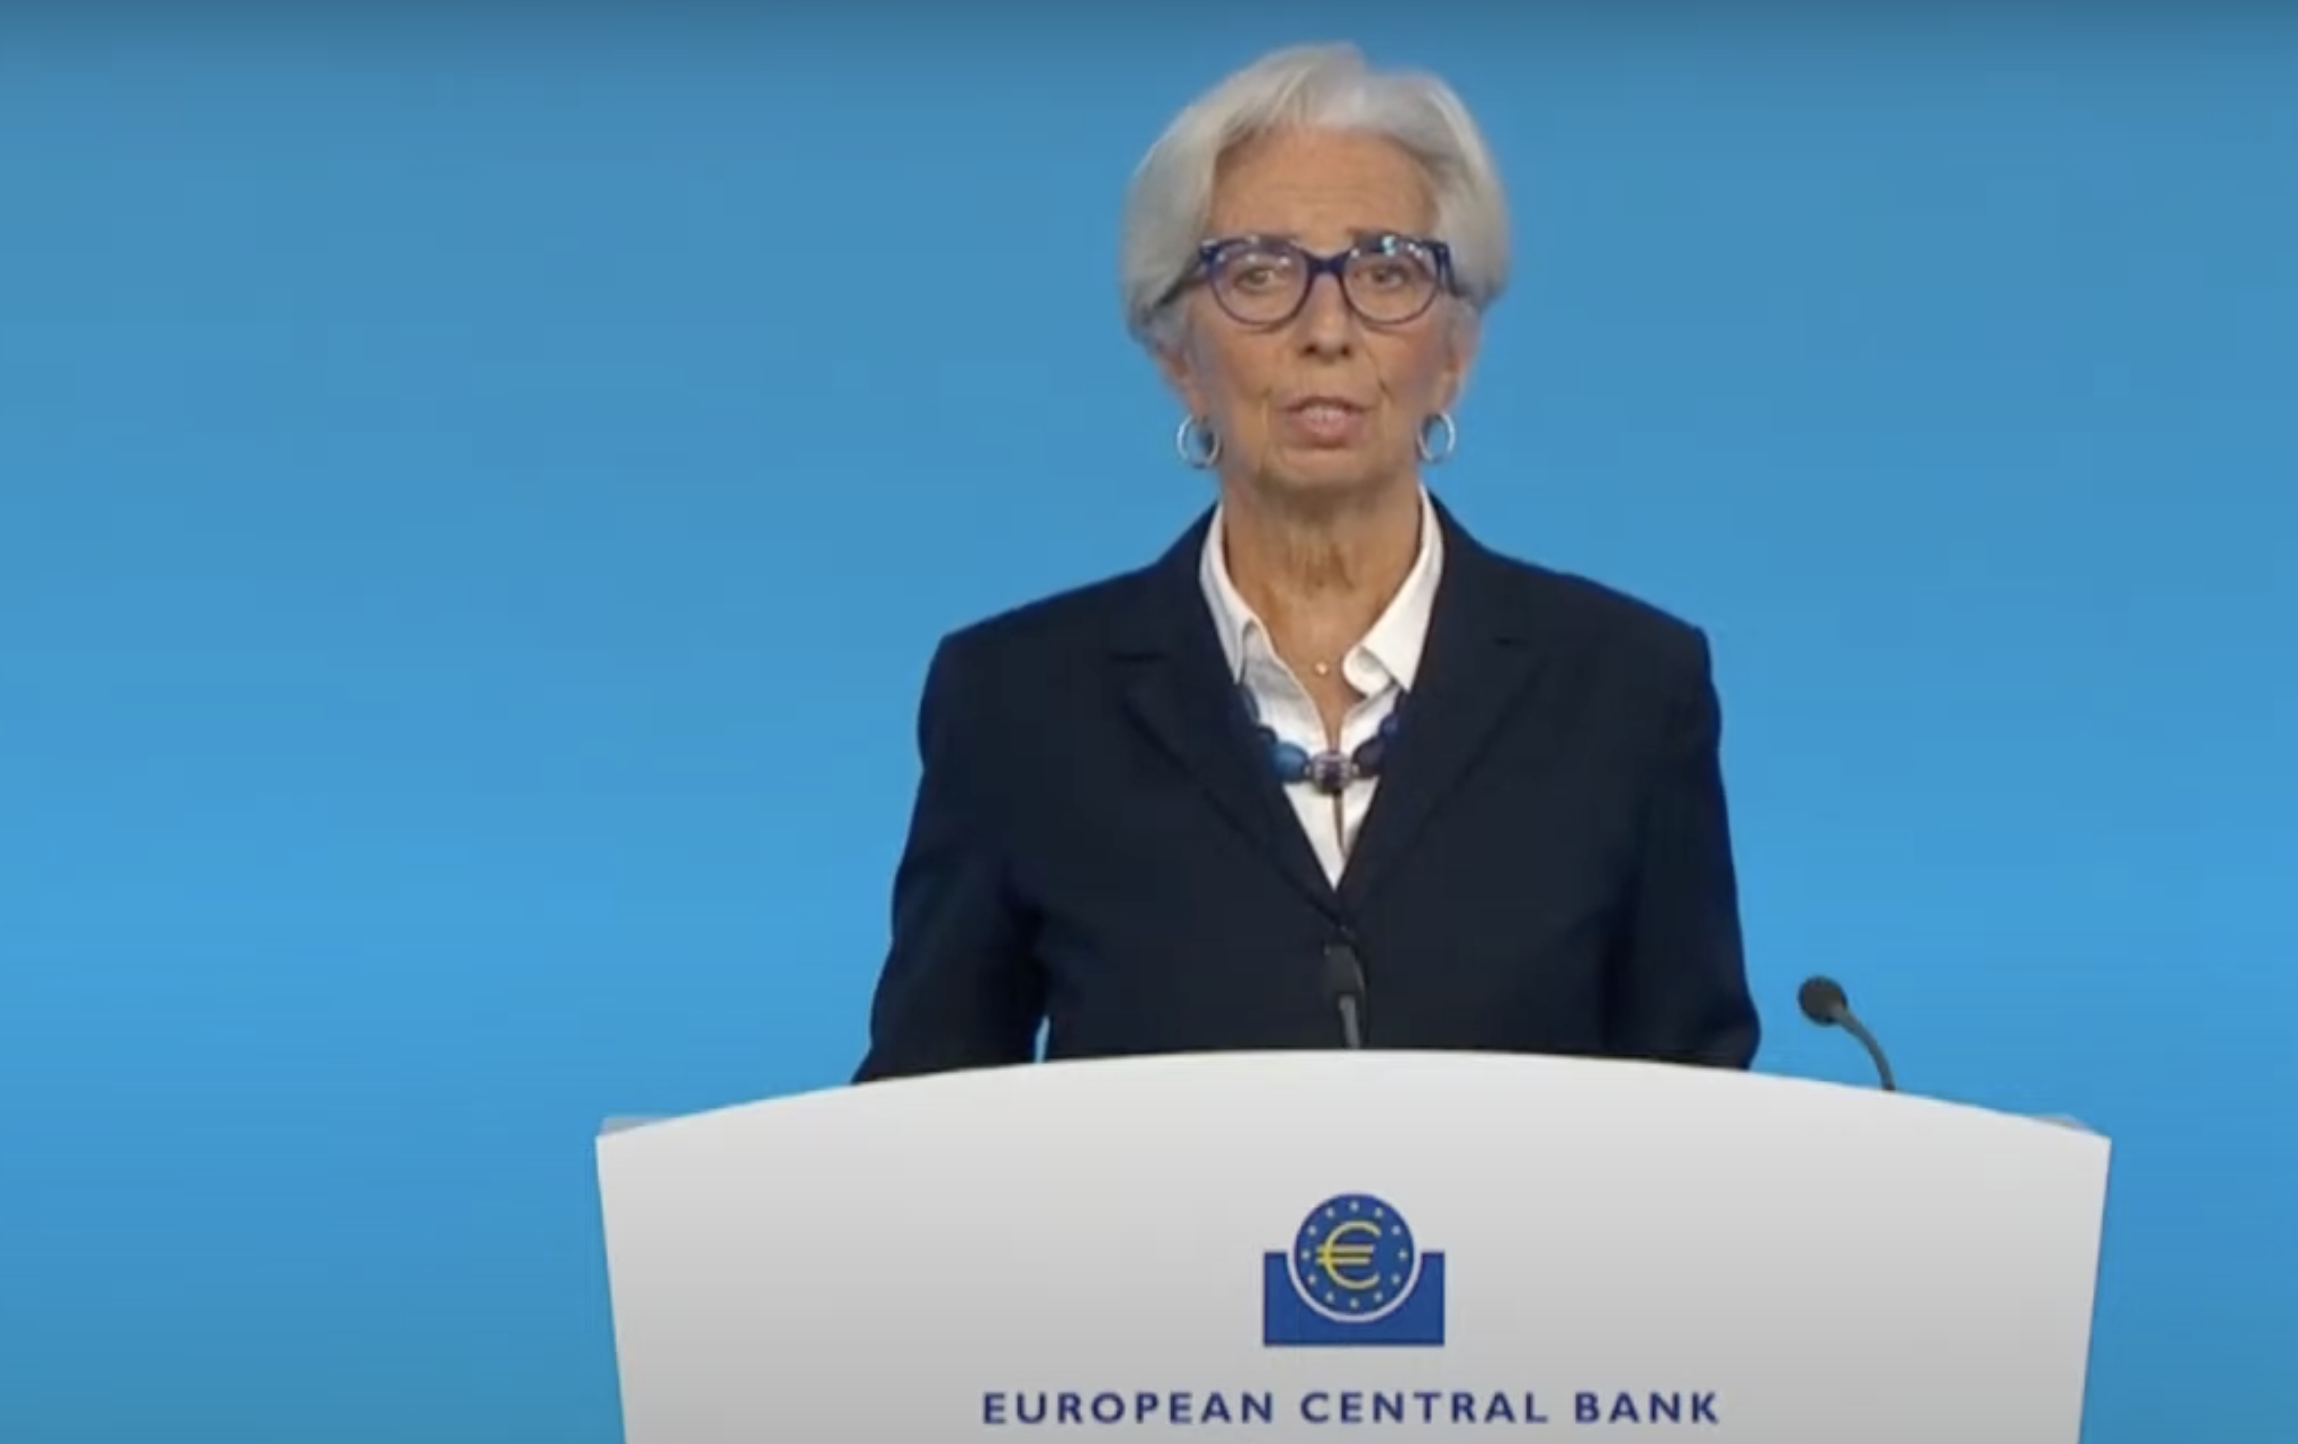 ECB's Lagarde during press conference, Feb 2022